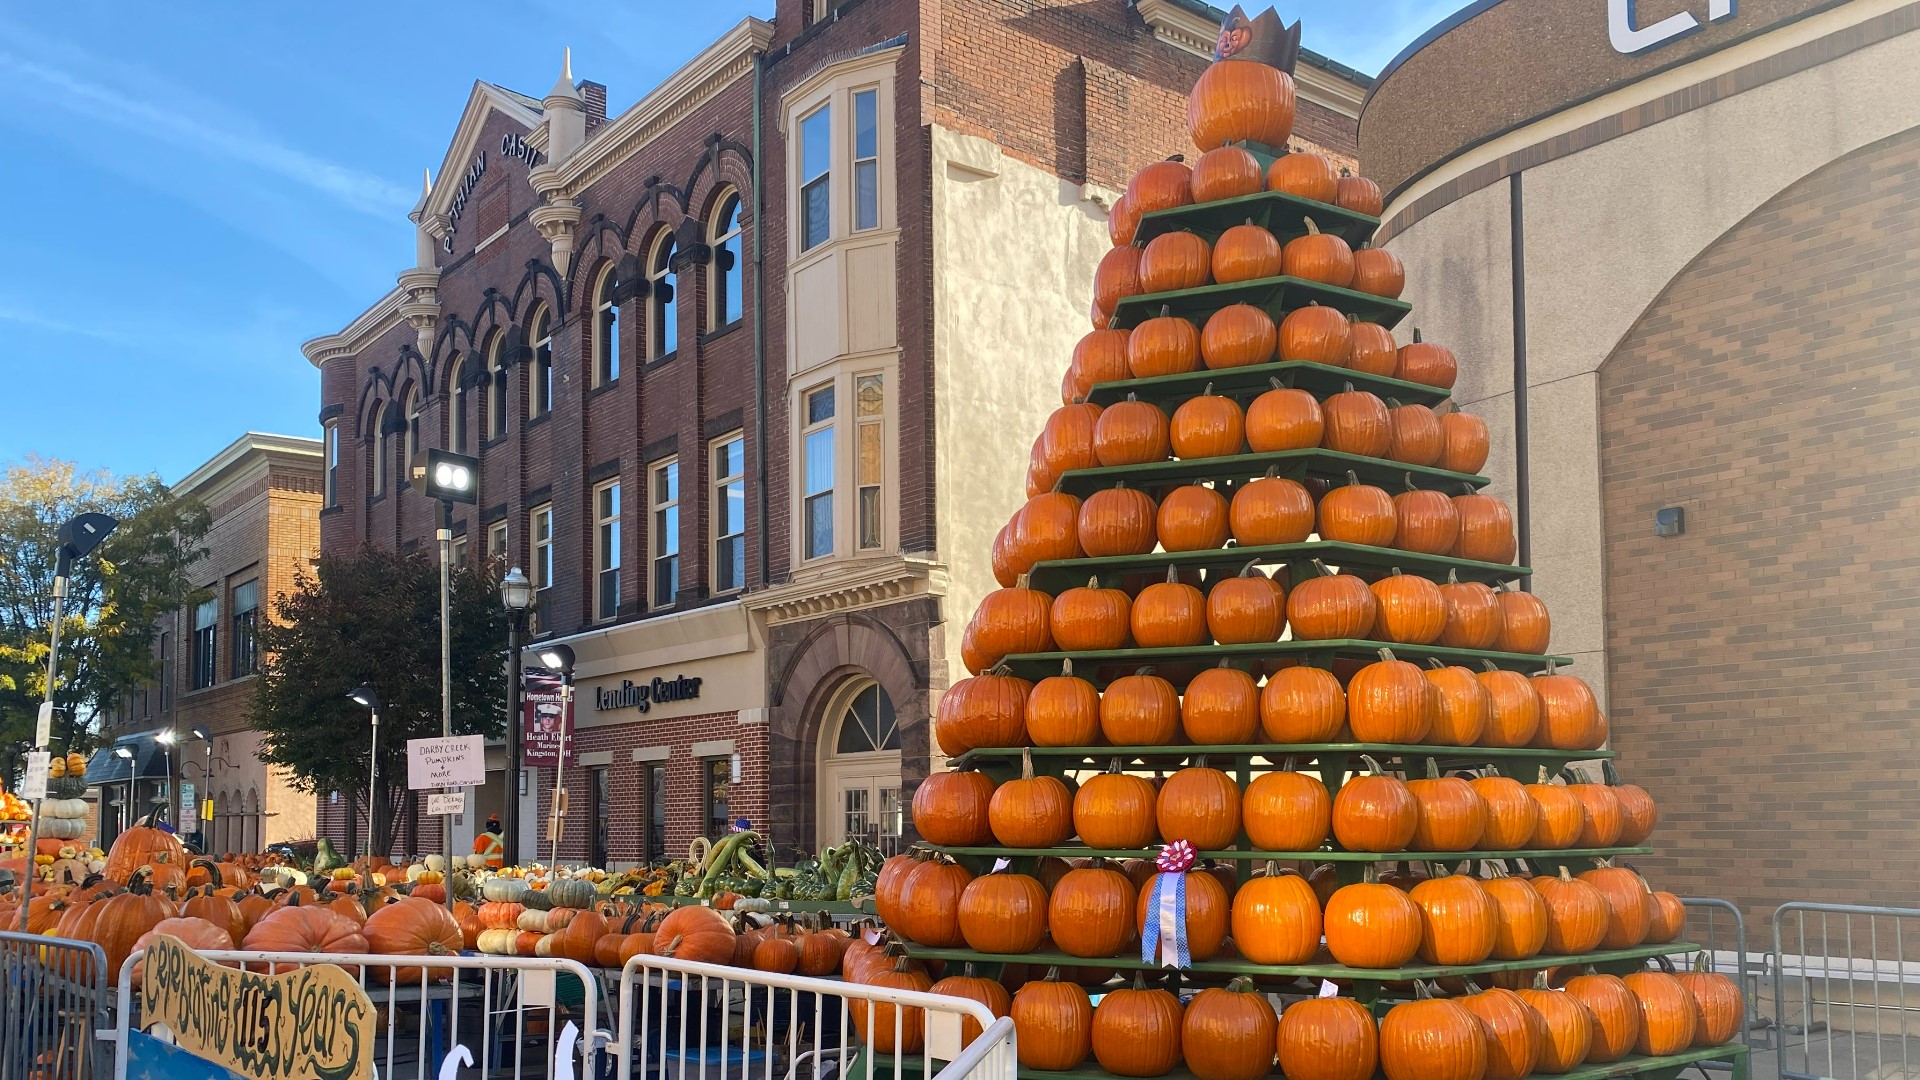 If you plan on heading to Circleville this week for their annual pumpkin show, there's a few things to know before you go.